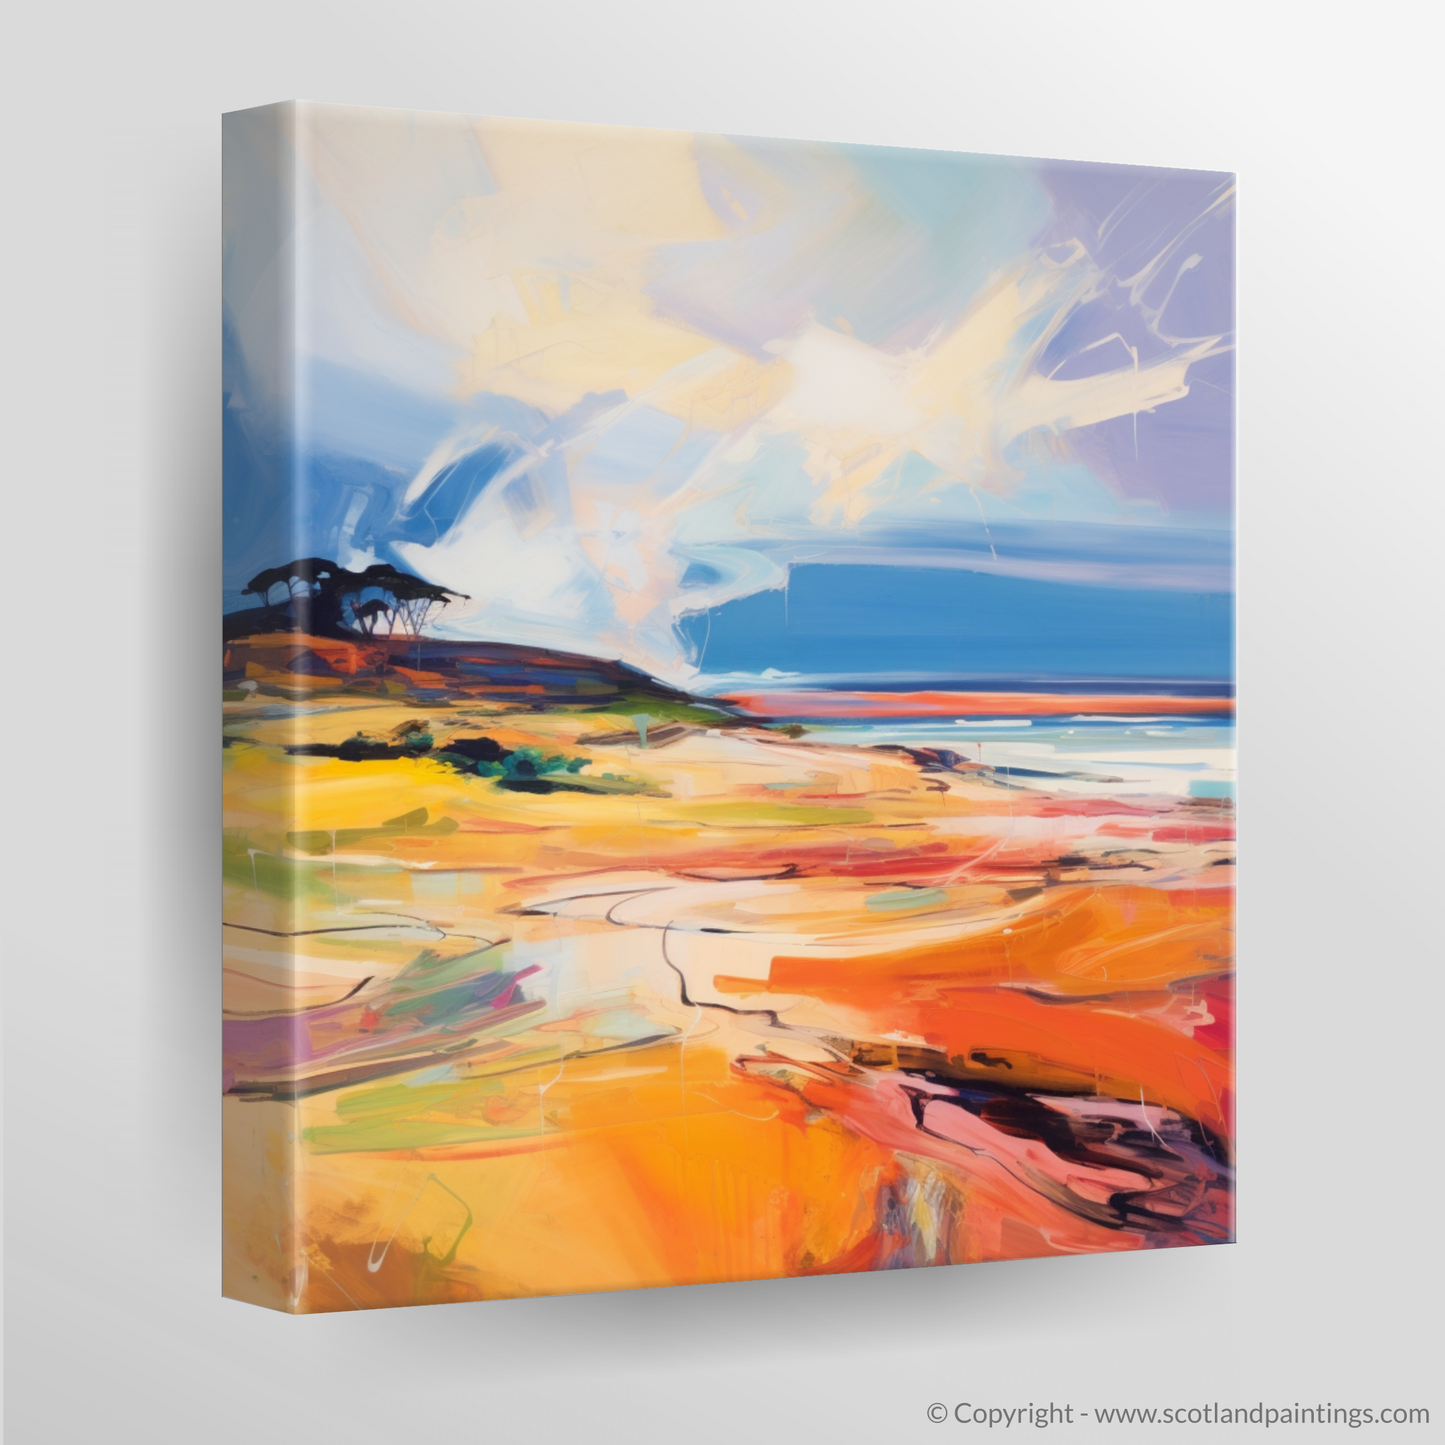 Gullane Sands Reimagined: An Abstract Expressionist Journey